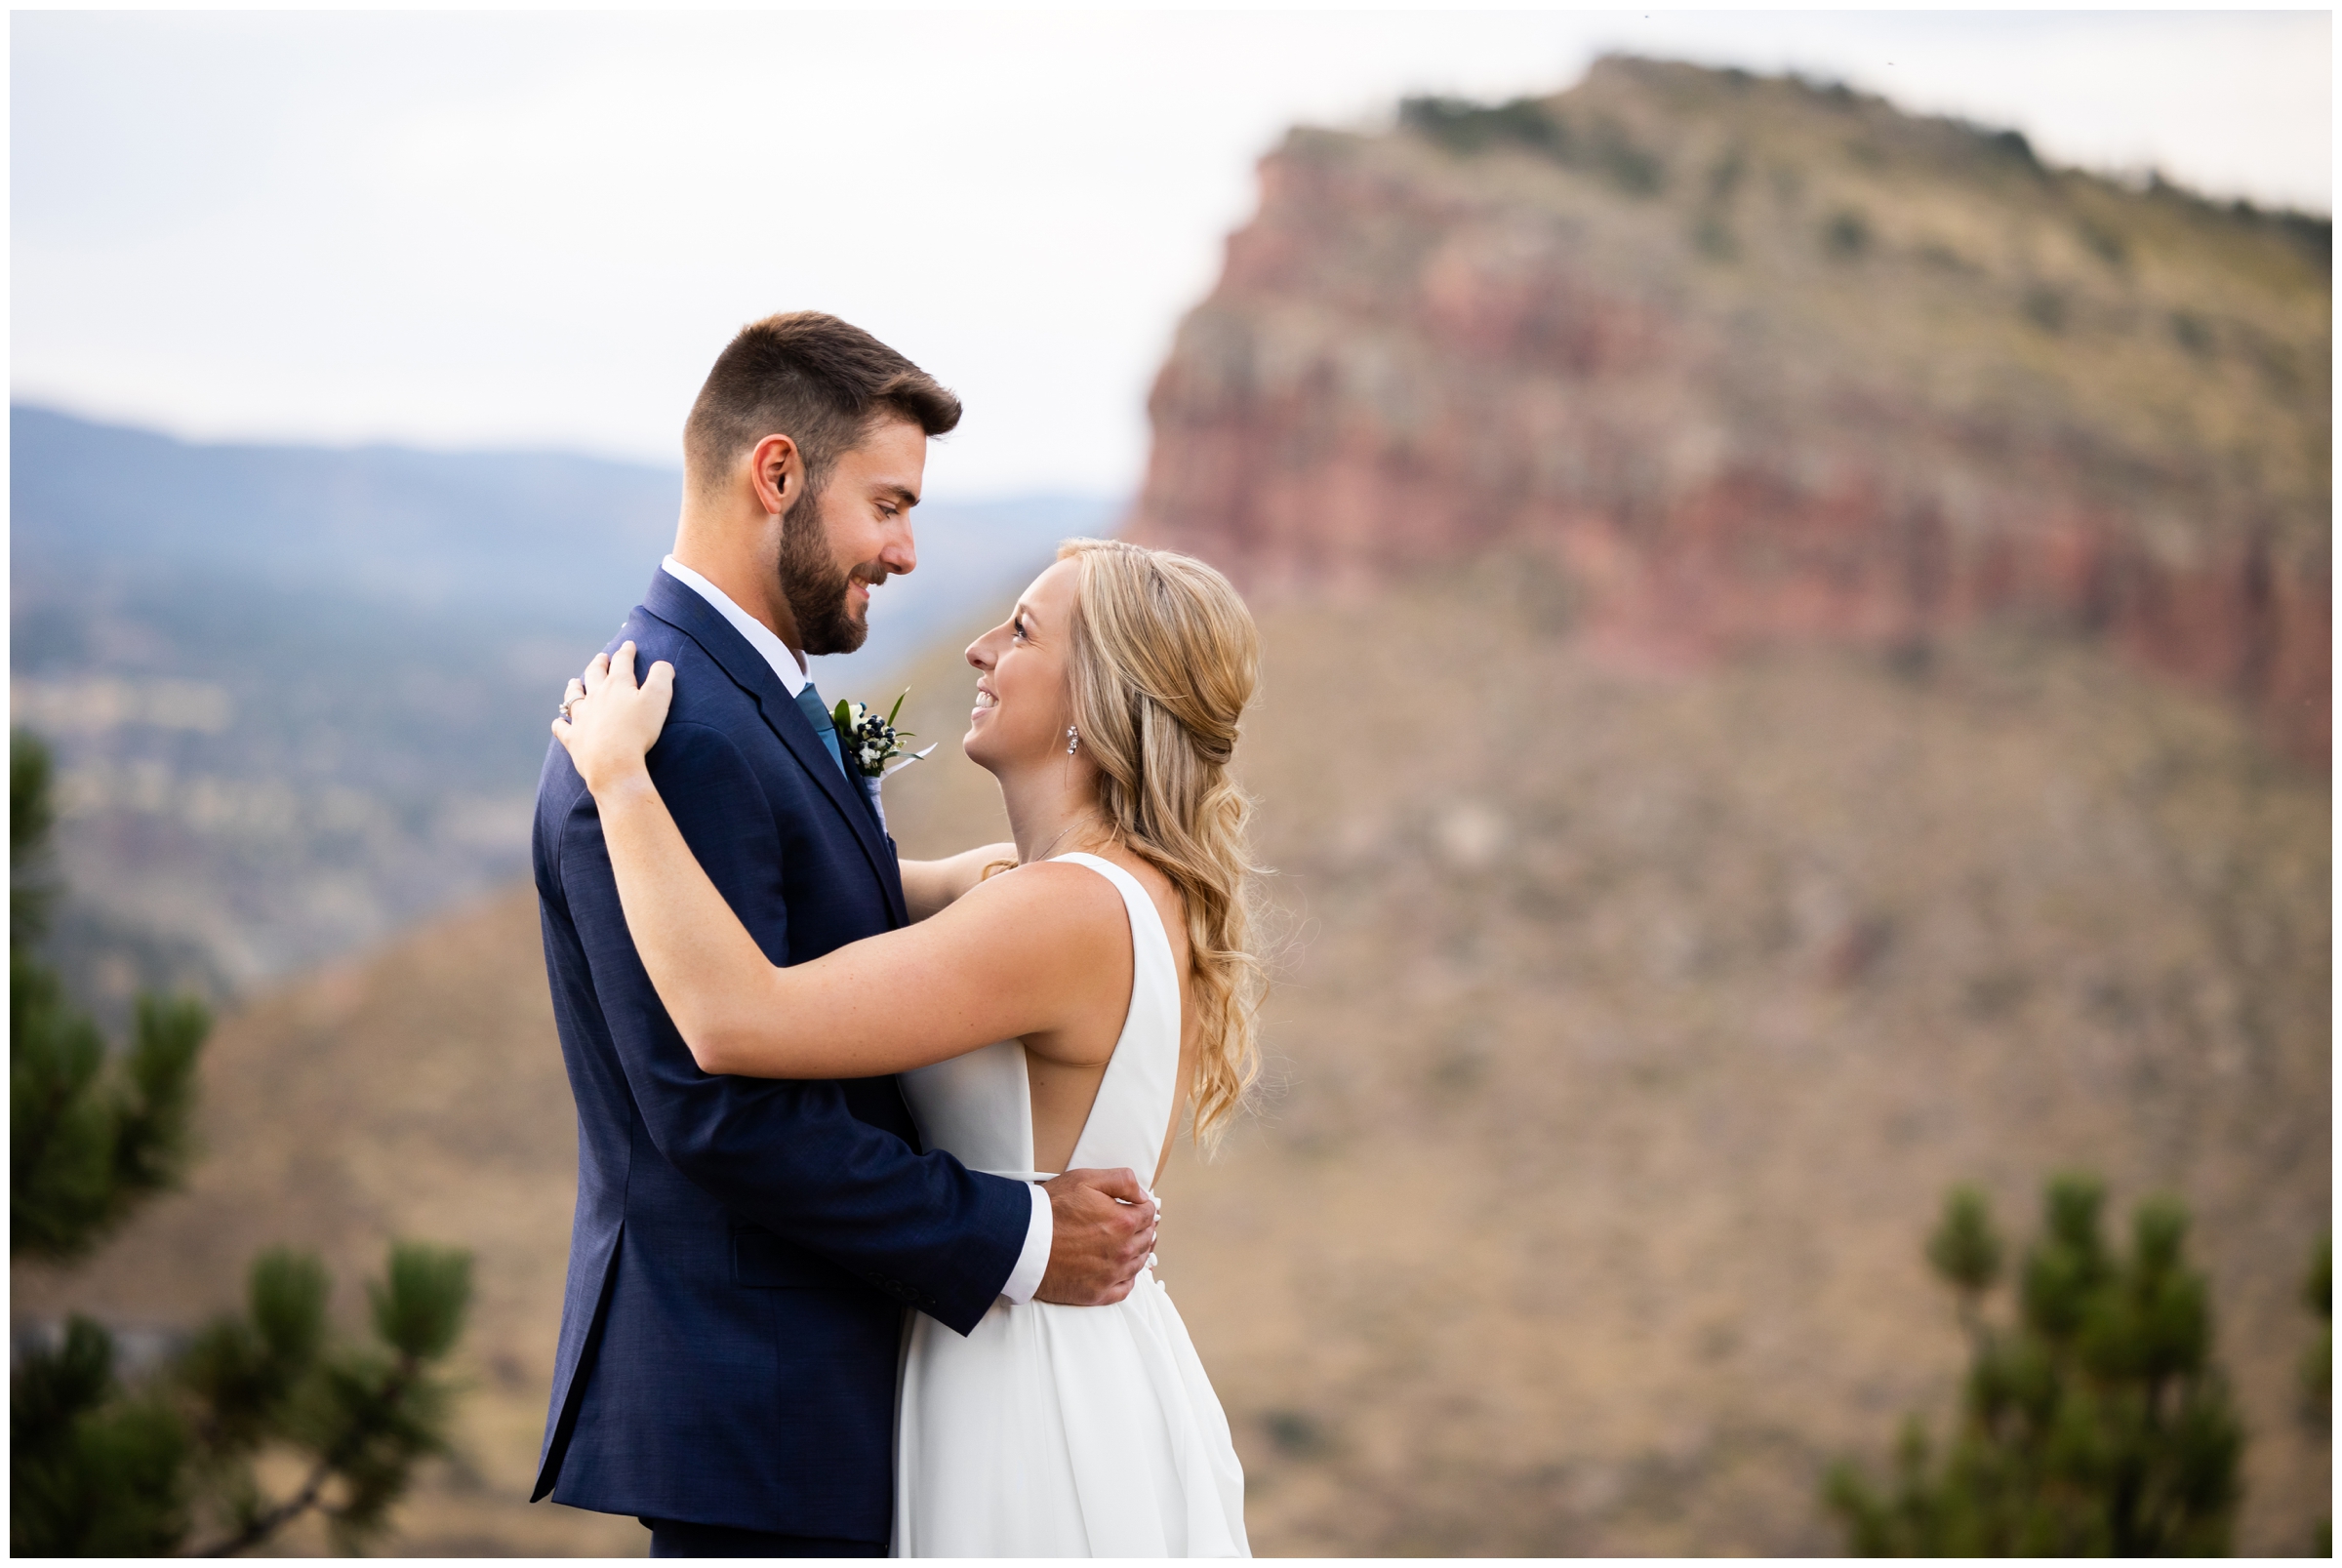 Colorado mountaintop wedding pictures by Plum Pretty Photo